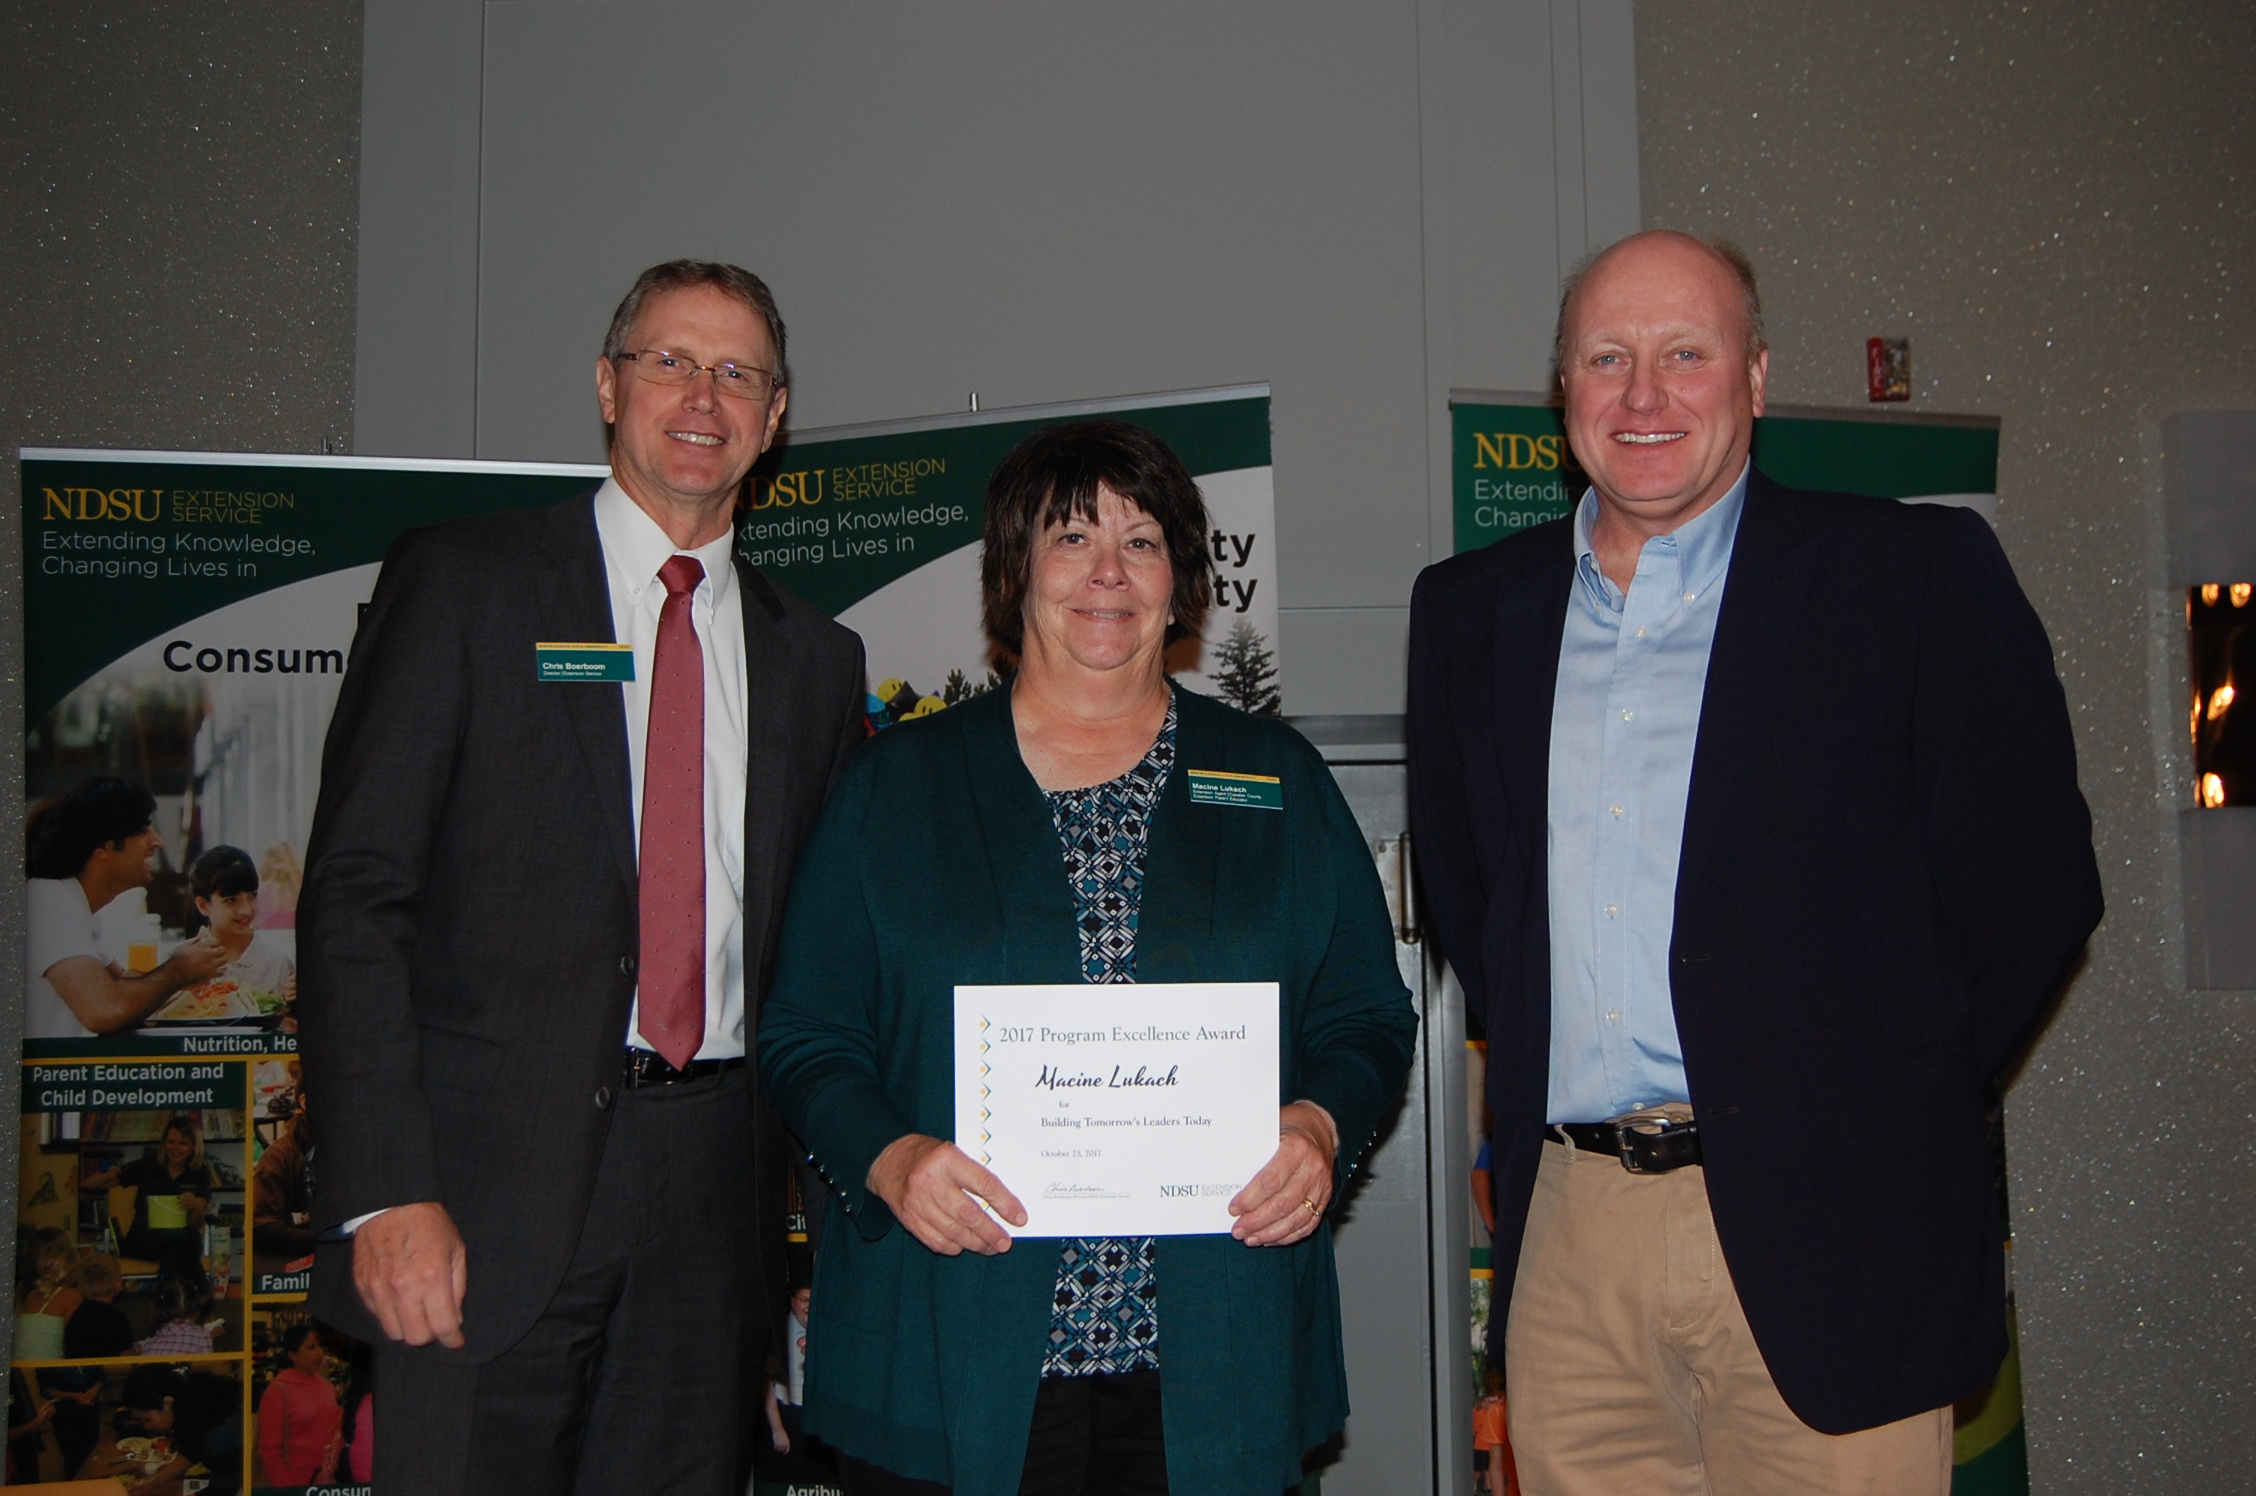 Macine Lukach, an agent from NDSU Extension's Cavalier County, receives a Program Excellence Award for the Building Tomorrow's Leaders Today program from NDSU Extension Director Chris Boerboom (left) and Jim Murphy, Farm and Ranch Guide. (NDSU photo)